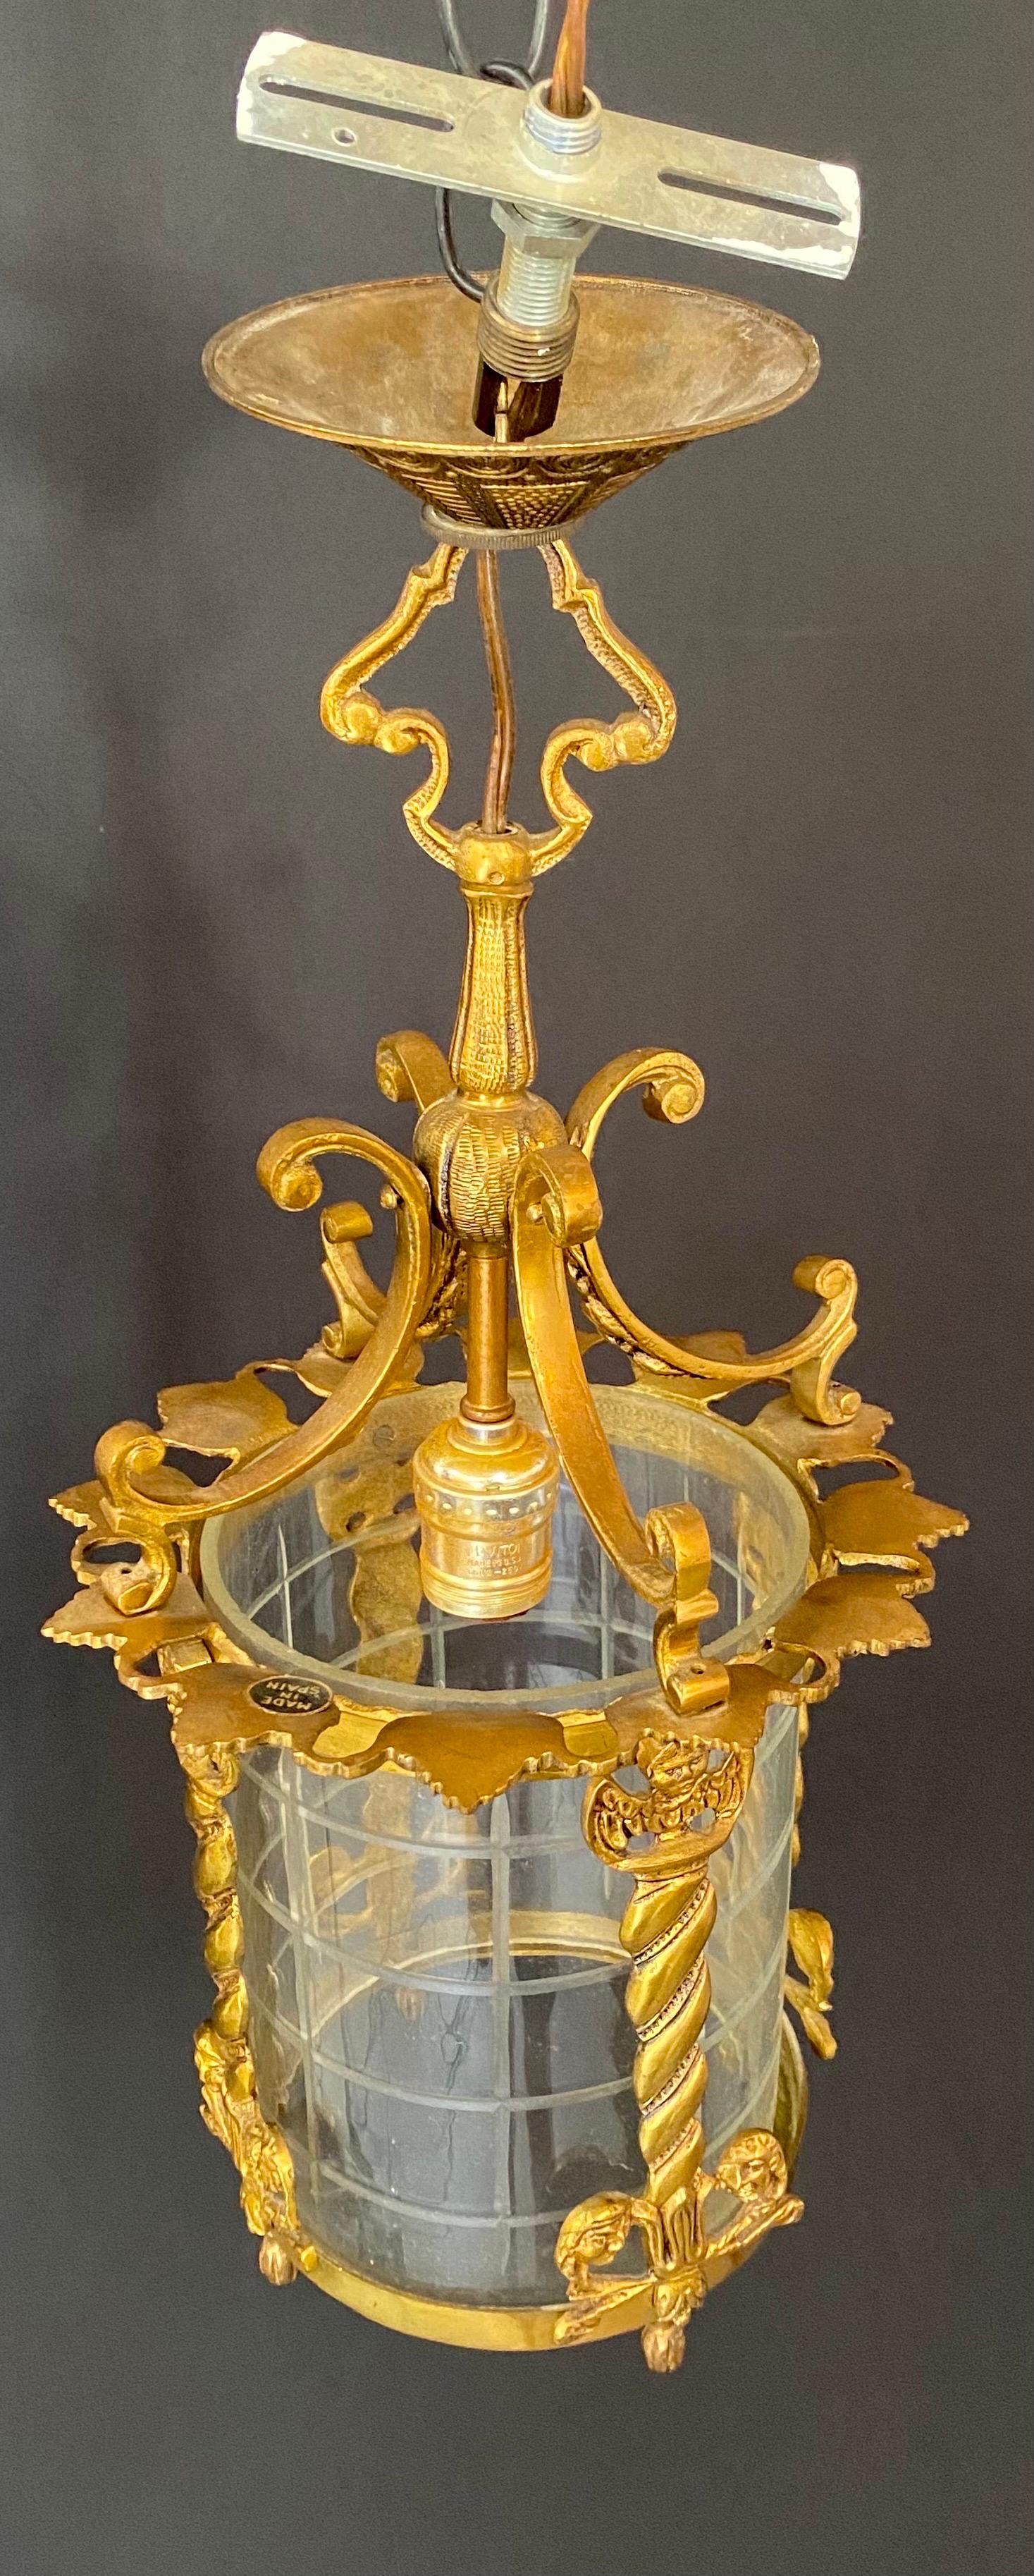 Spanish Neoclassical Revival Style Figural Gilt Iron Lantern or Pendant  In Good Condition For Sale In Plainview, NY